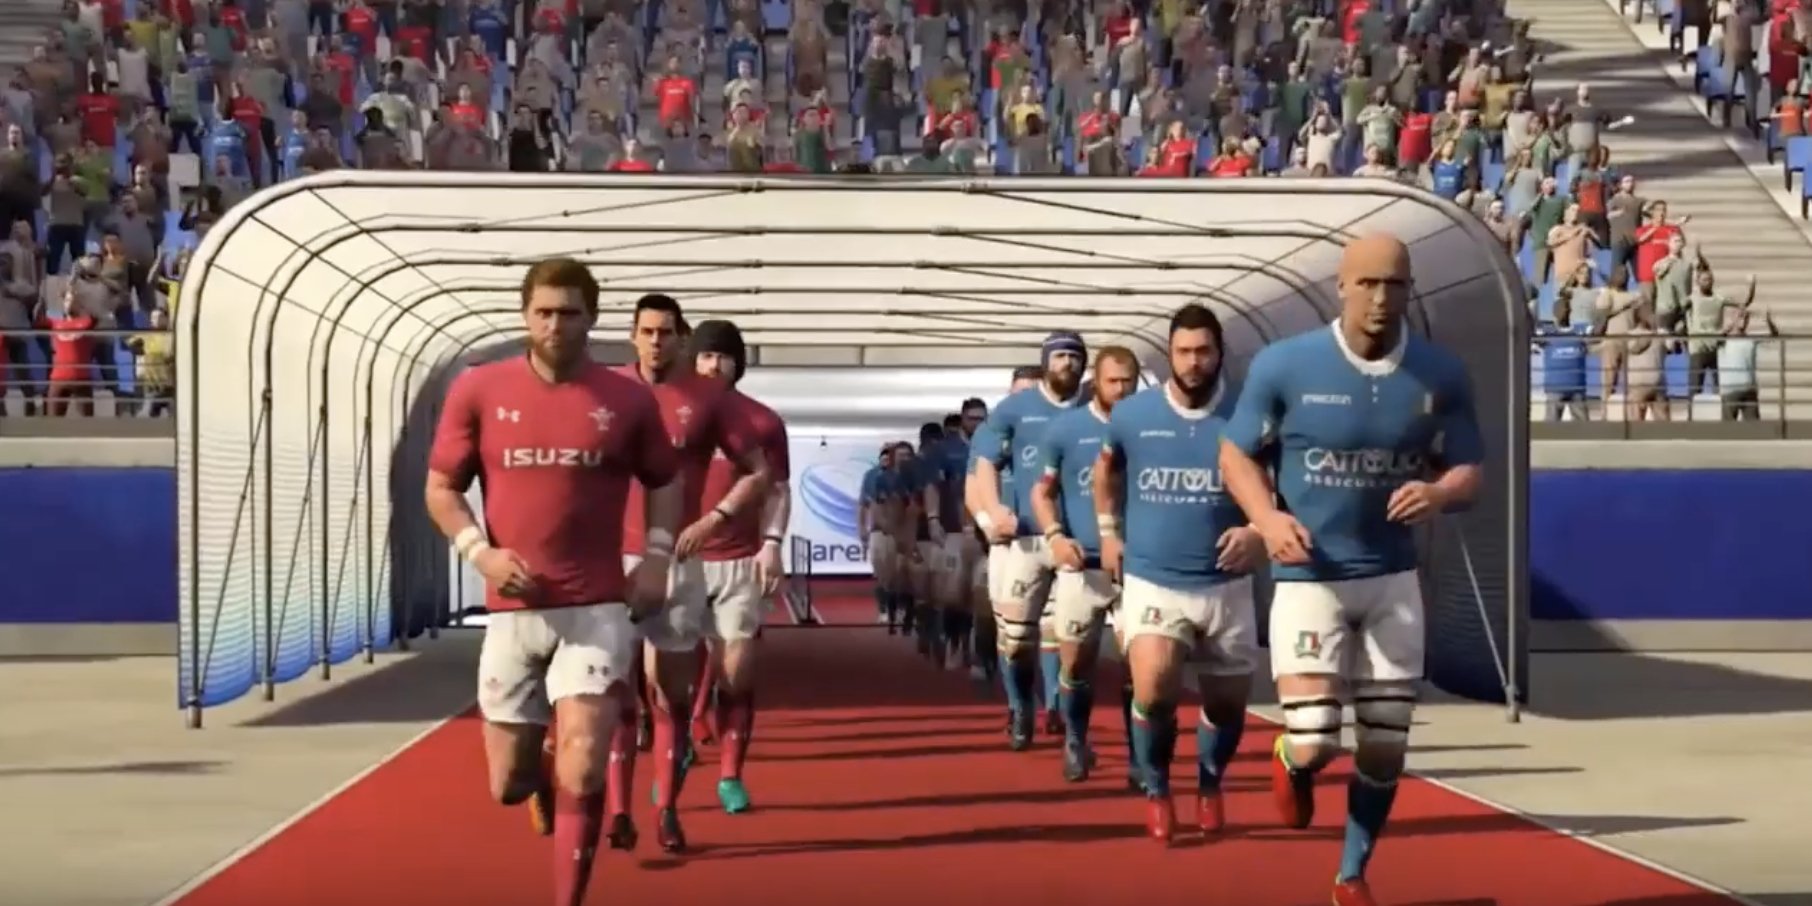 The new "Rugby 20" game trailer is absolutely horrendous